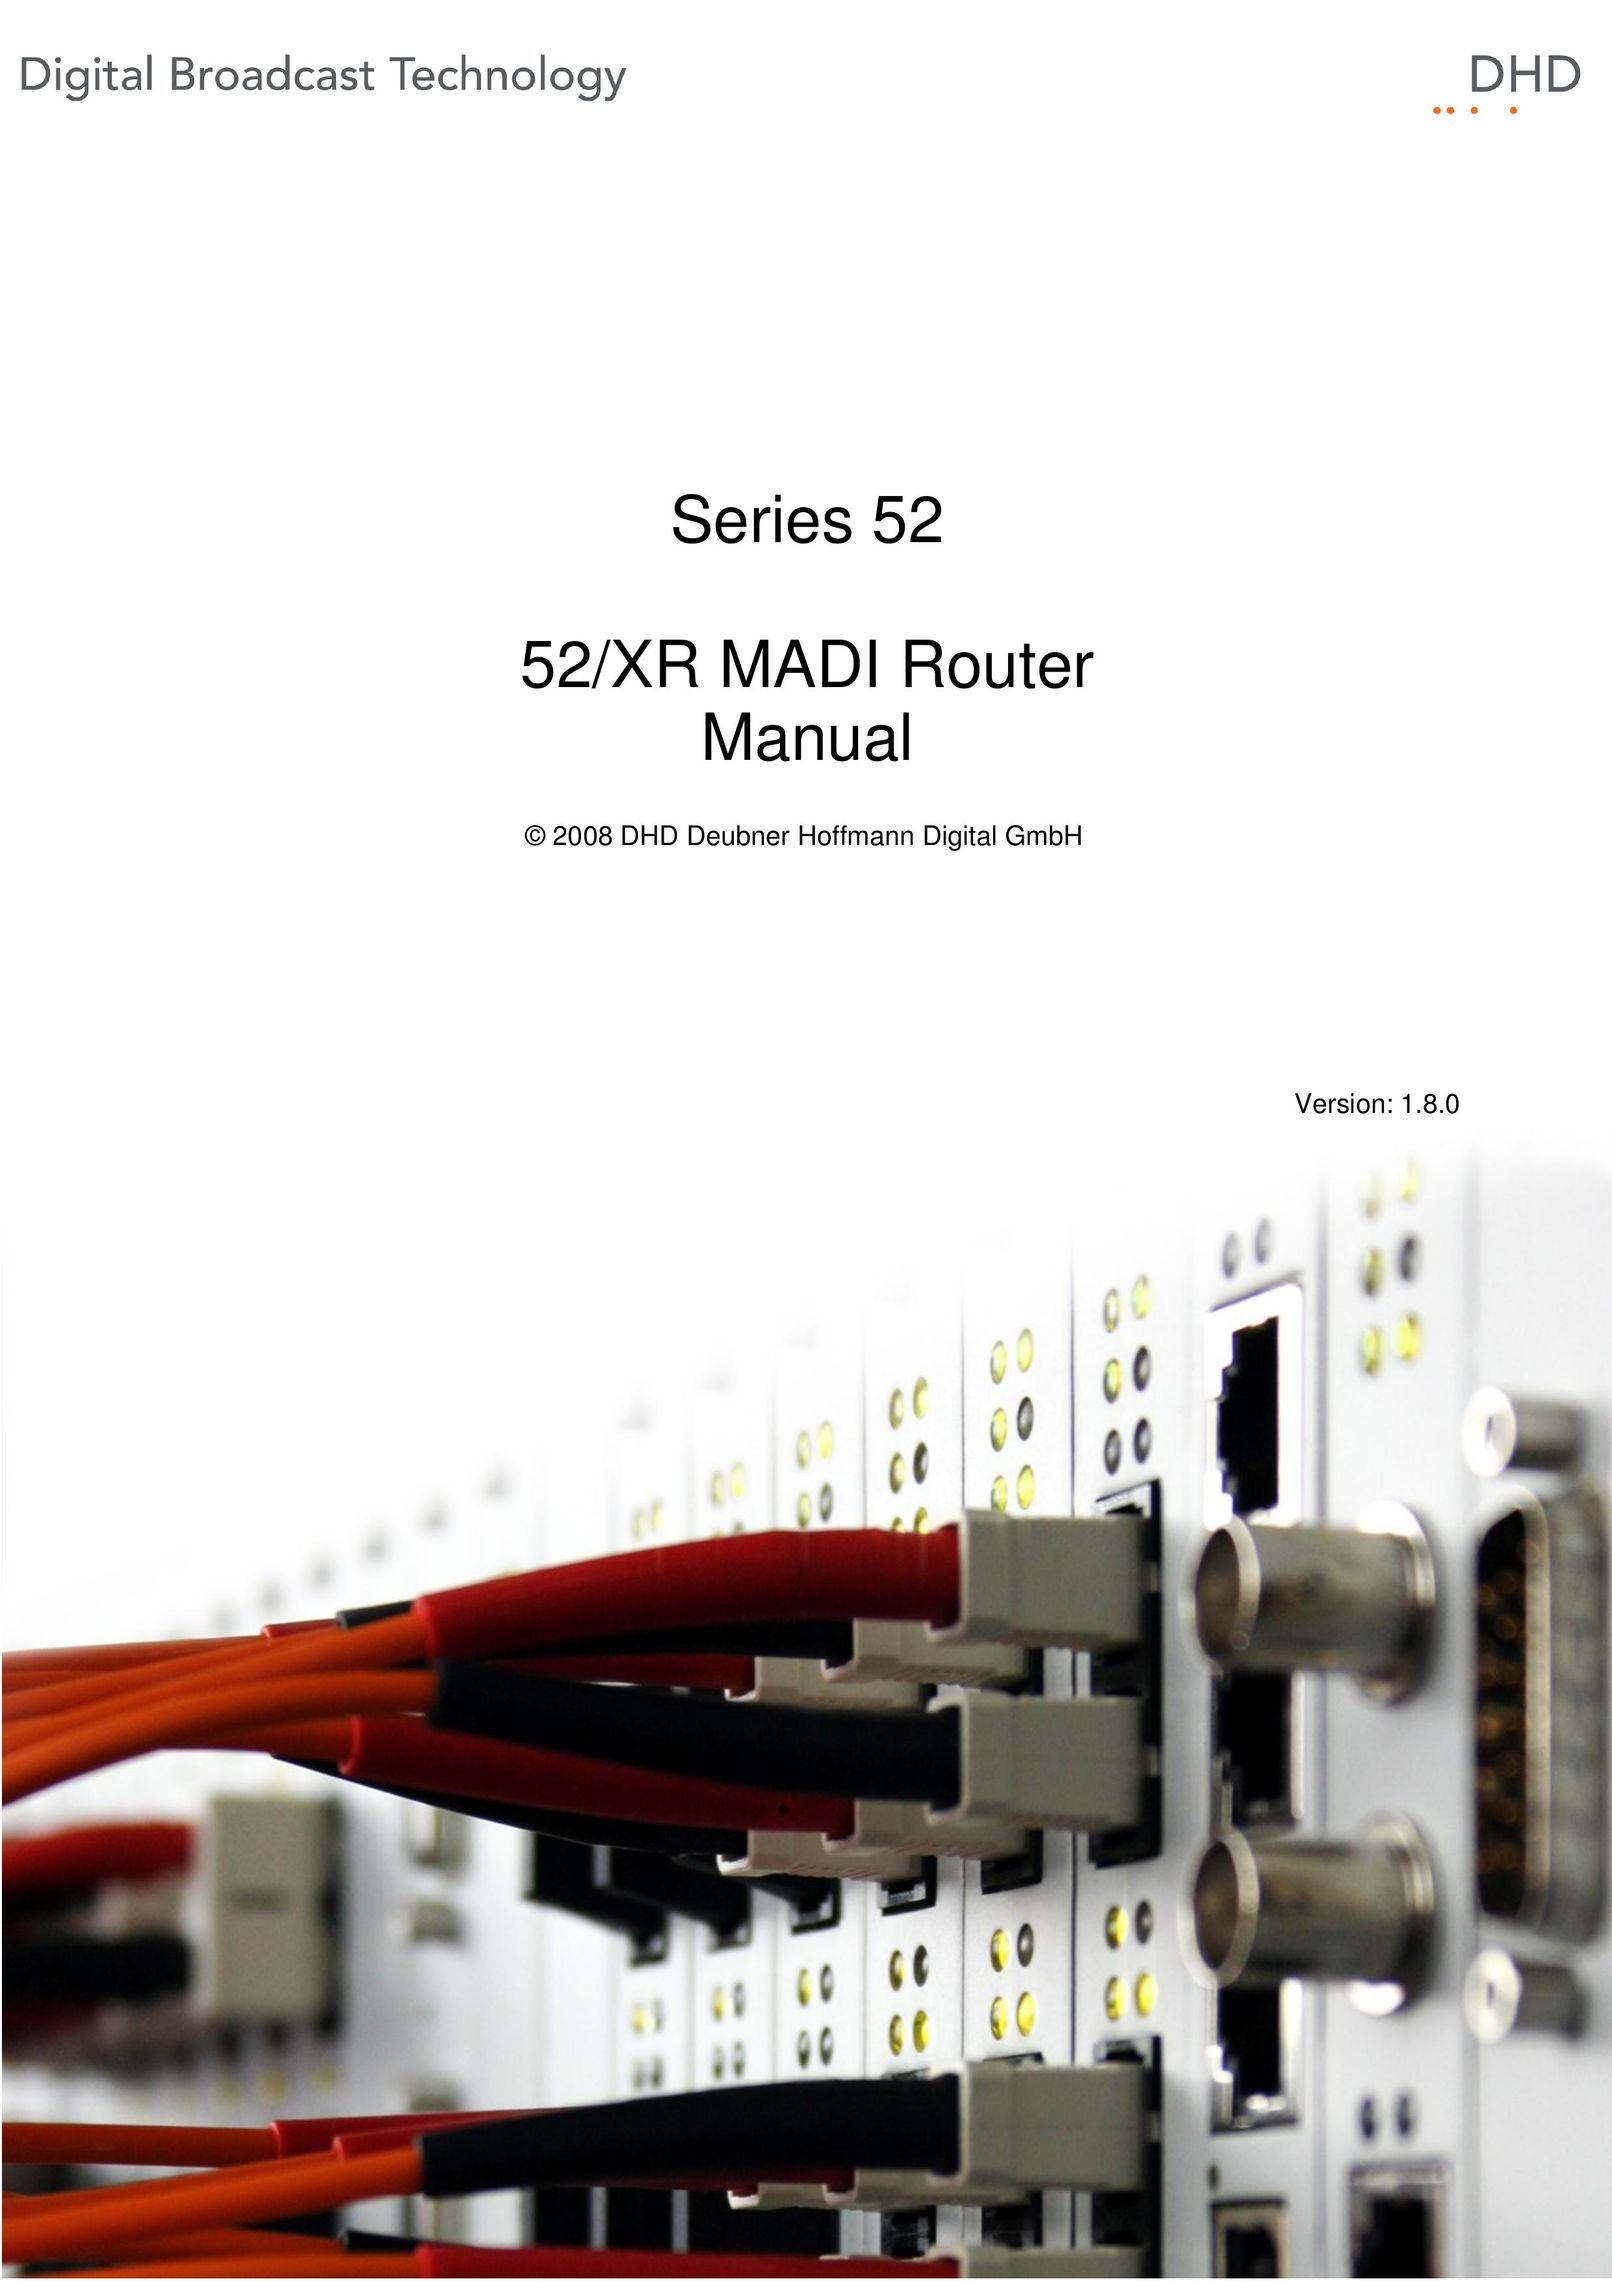 DHD Power Cruiser 52/XR Network Router User Manual